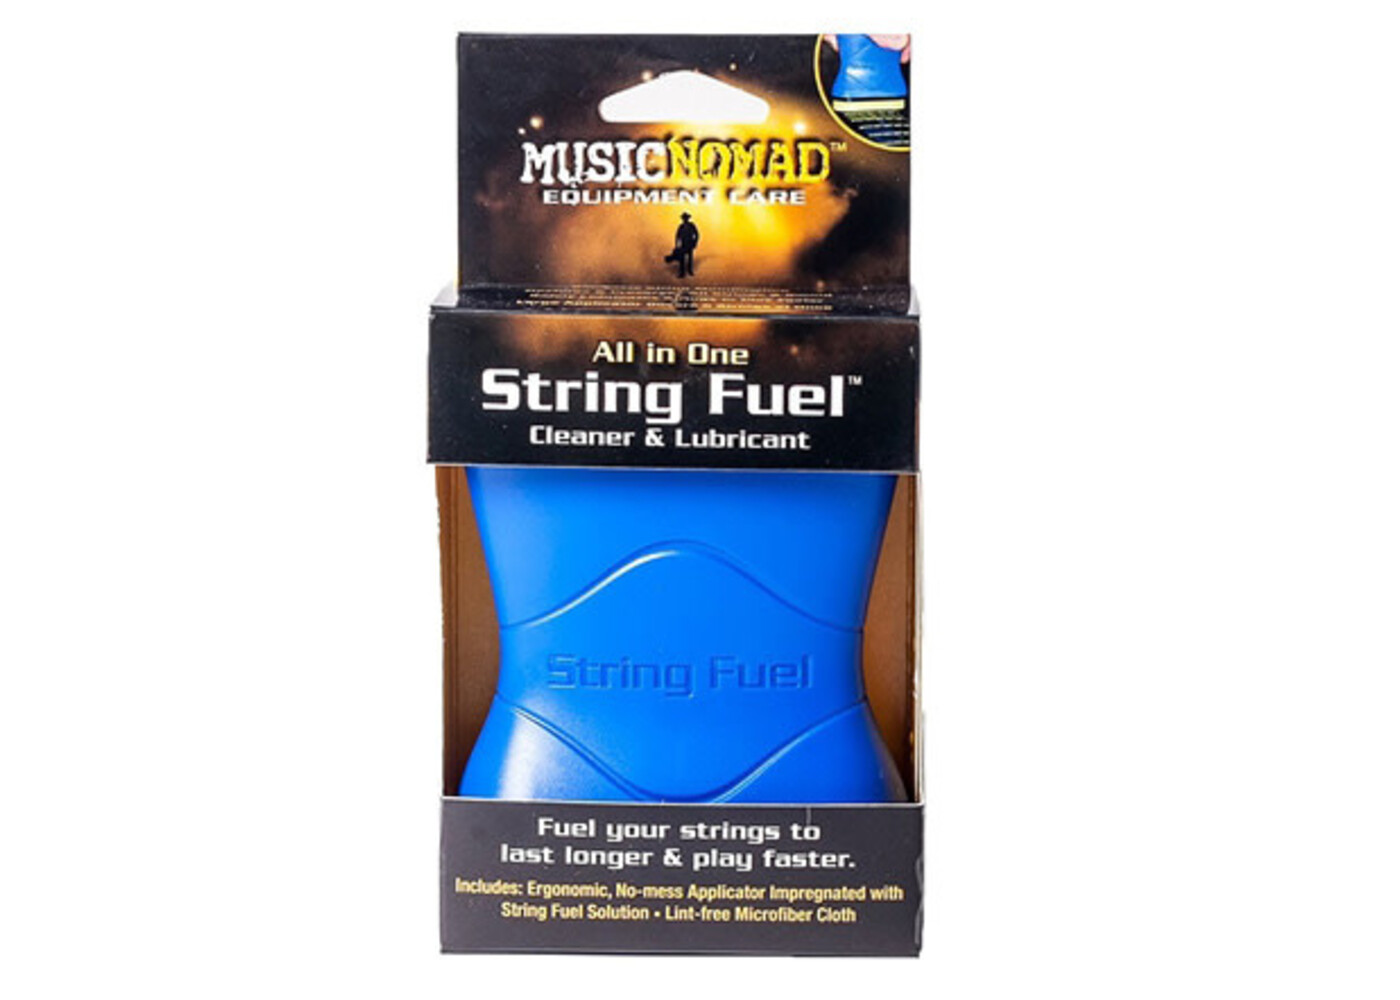 Music Nomad MusicNomad String Fuel All in One Cleaner & Lubricant with Microfiber Cloth